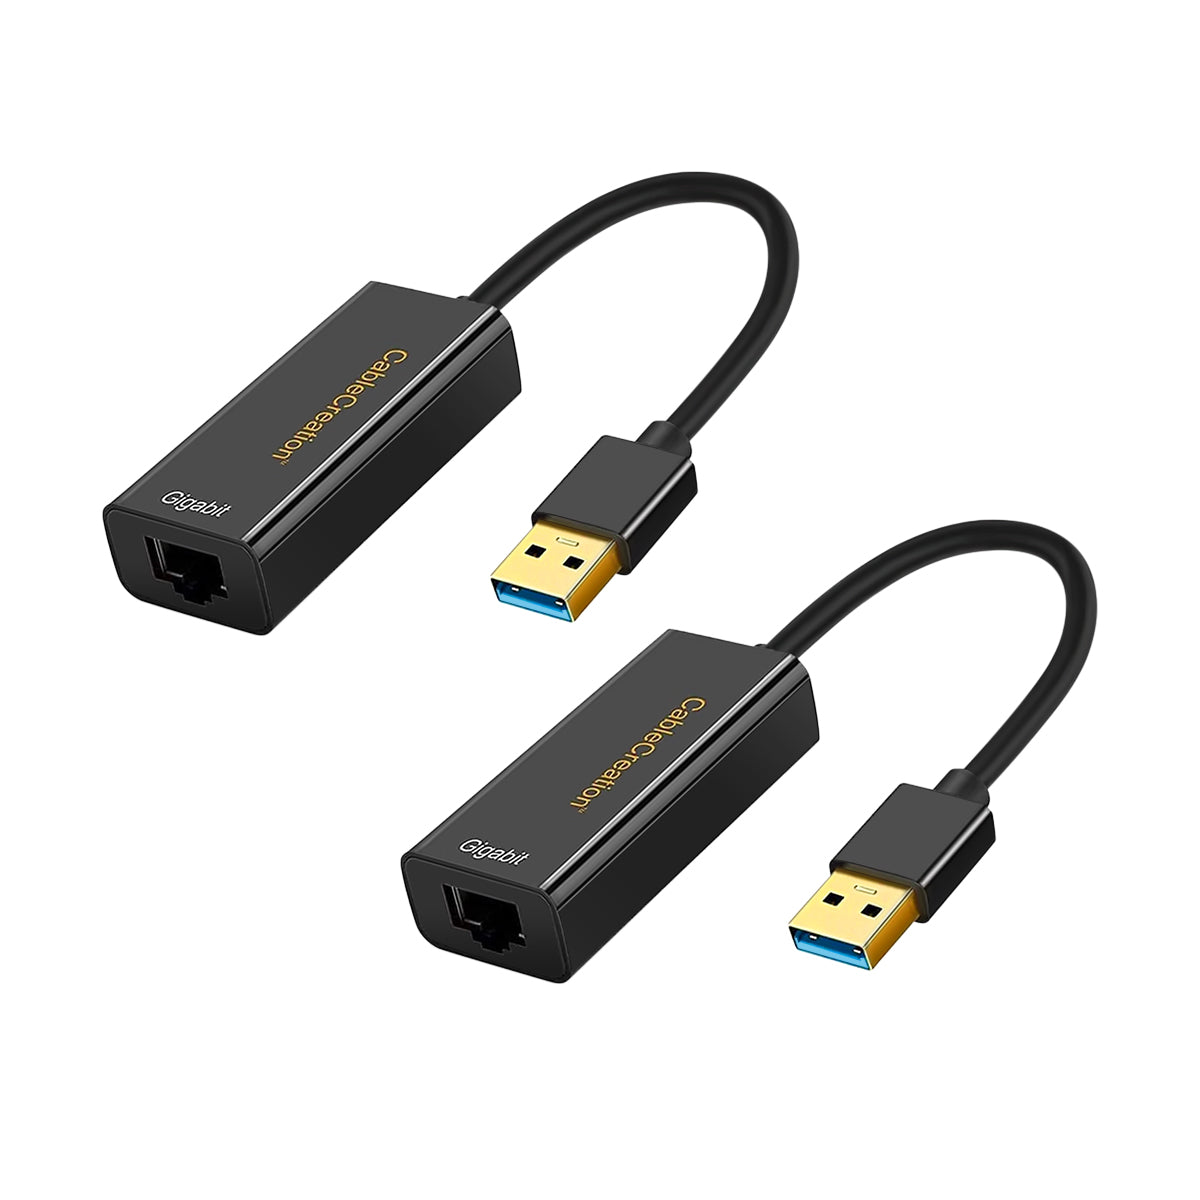 2-Pack USB 3.0 to Ethernet Adapter-1Gbps CD0026-2